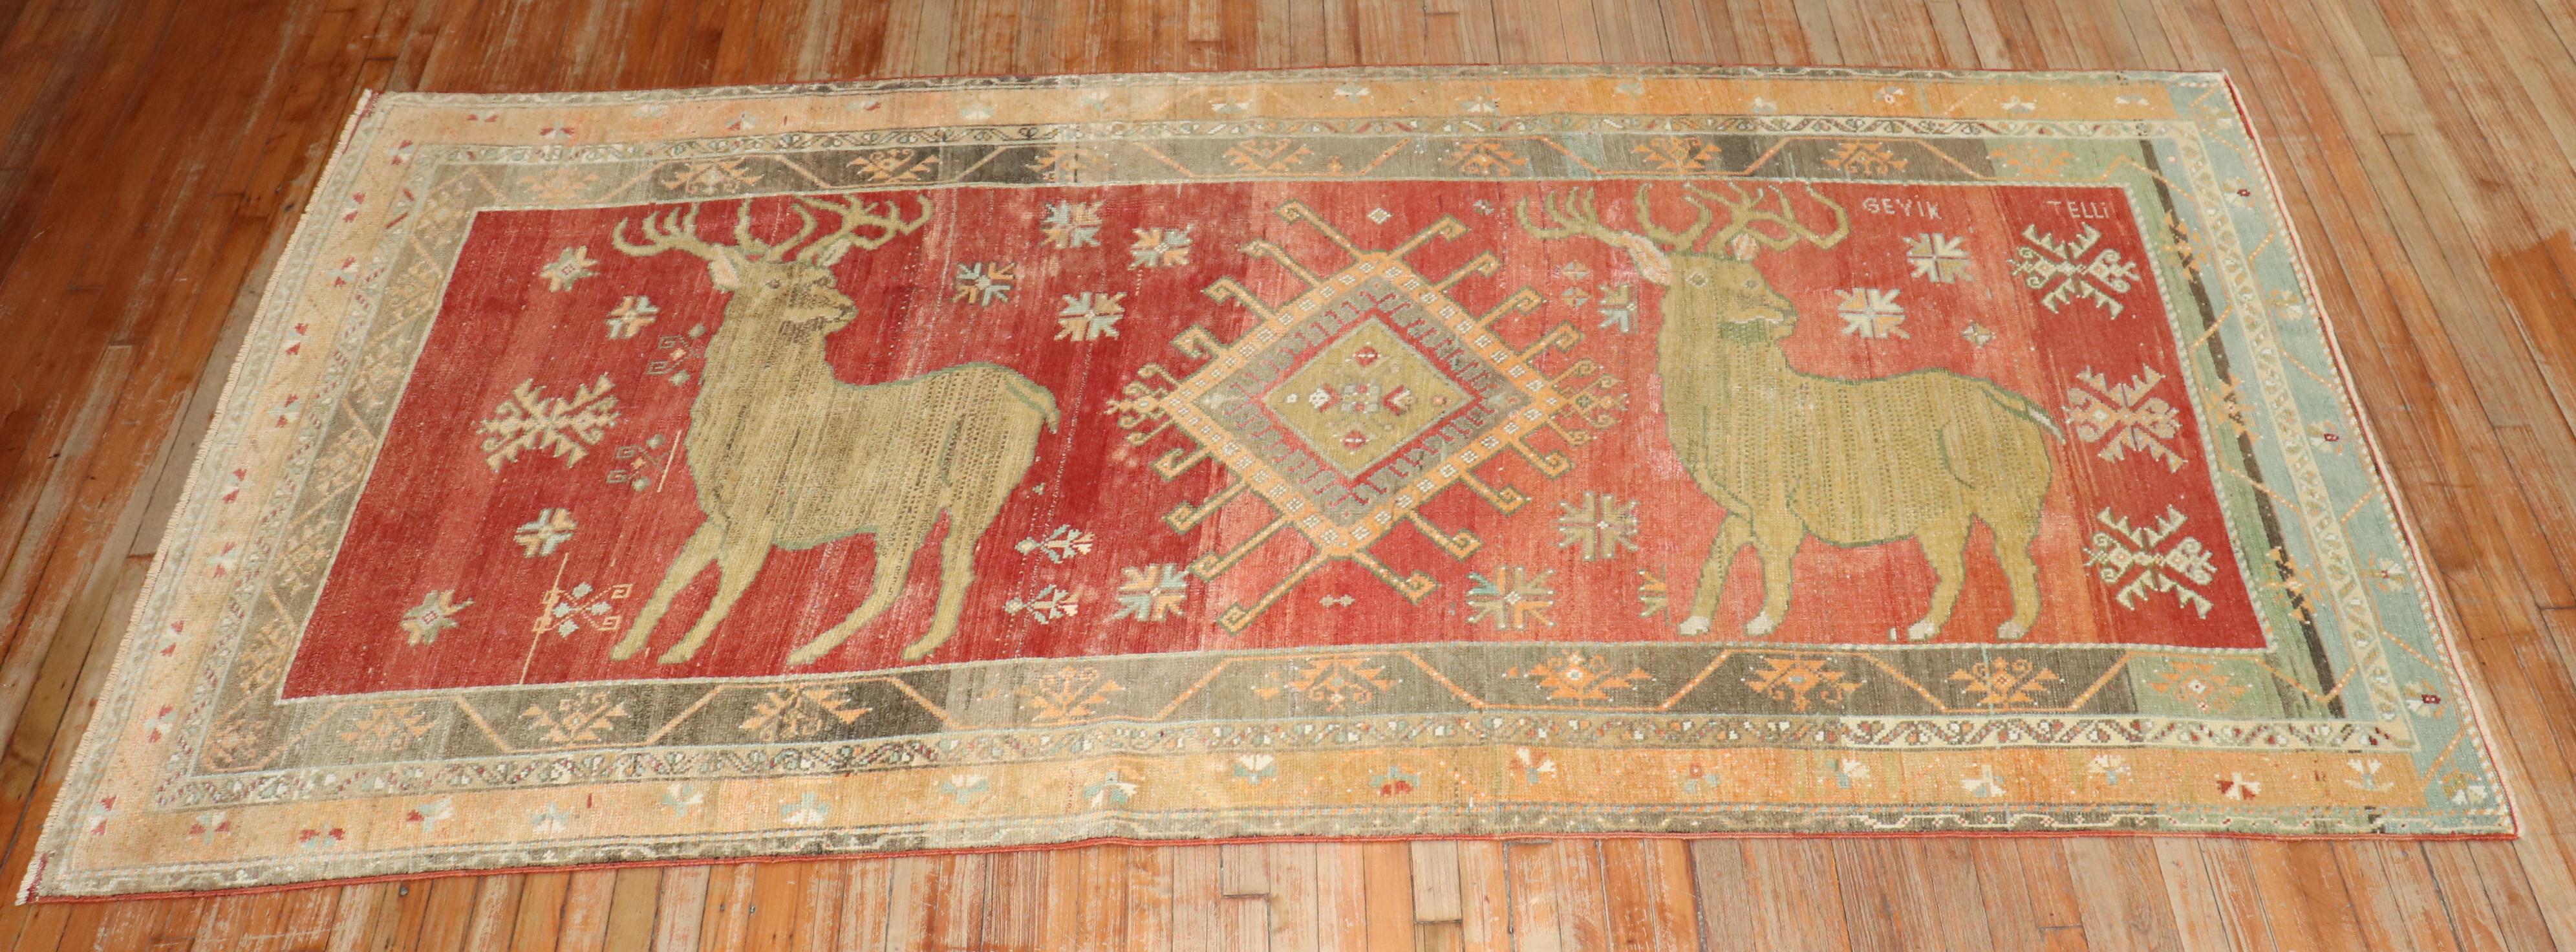 Zabihi Collection Large Deer Turkish Pictorial Rug In Good Condition For Sale In New York, NY